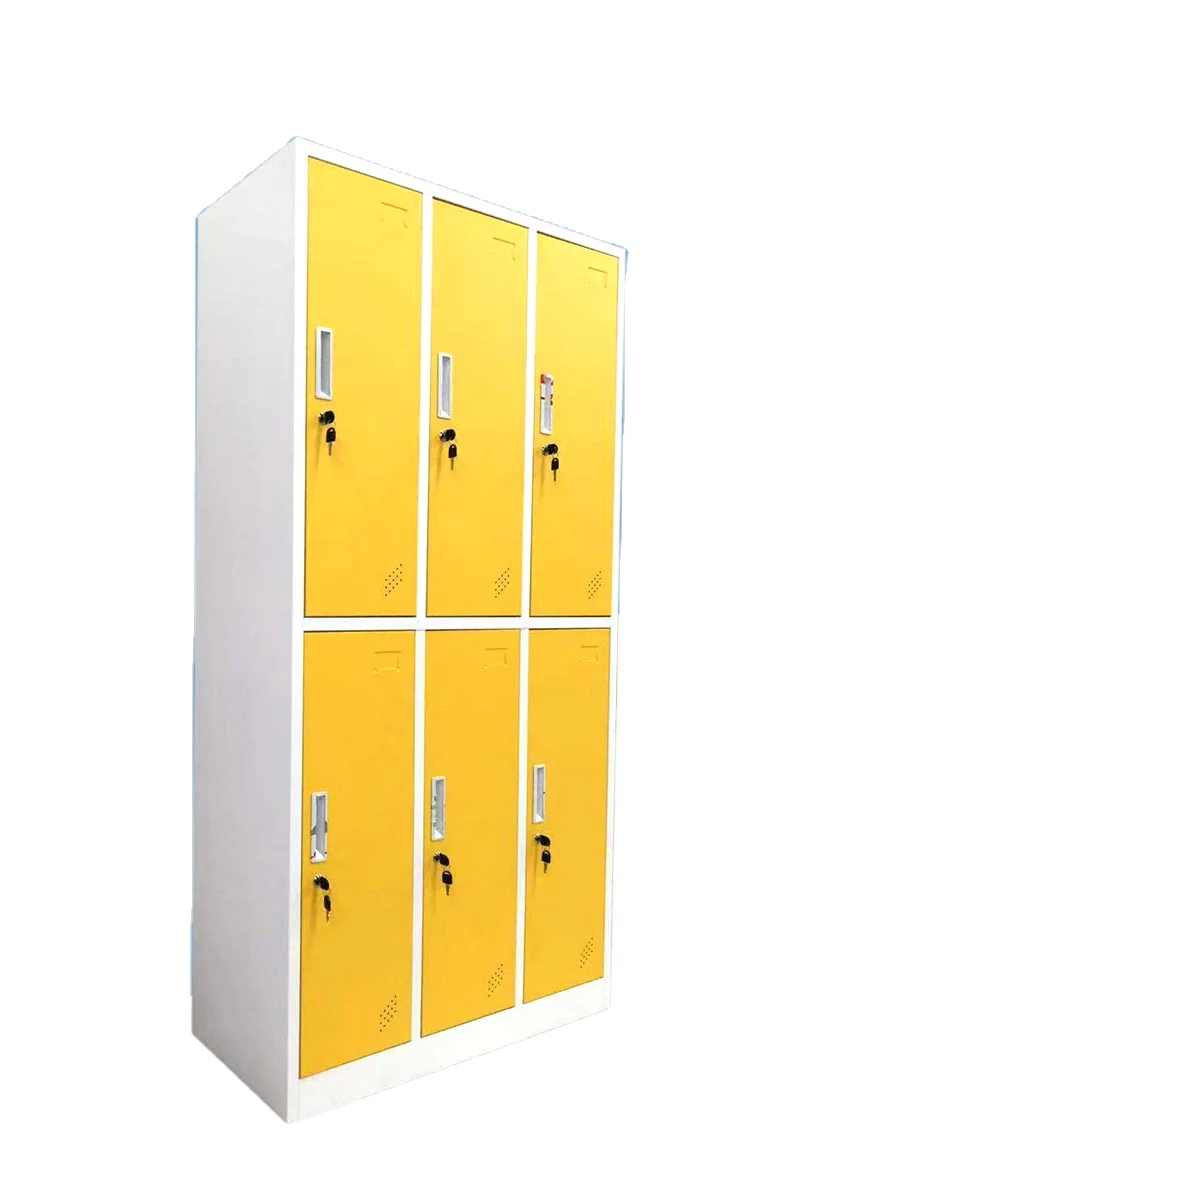 Six-door Yellow Modern Office Archive Storage Cabinet - Buy Commerical  Storage Equipment,Upright Storage Cabinet,Steel Locker Product on  